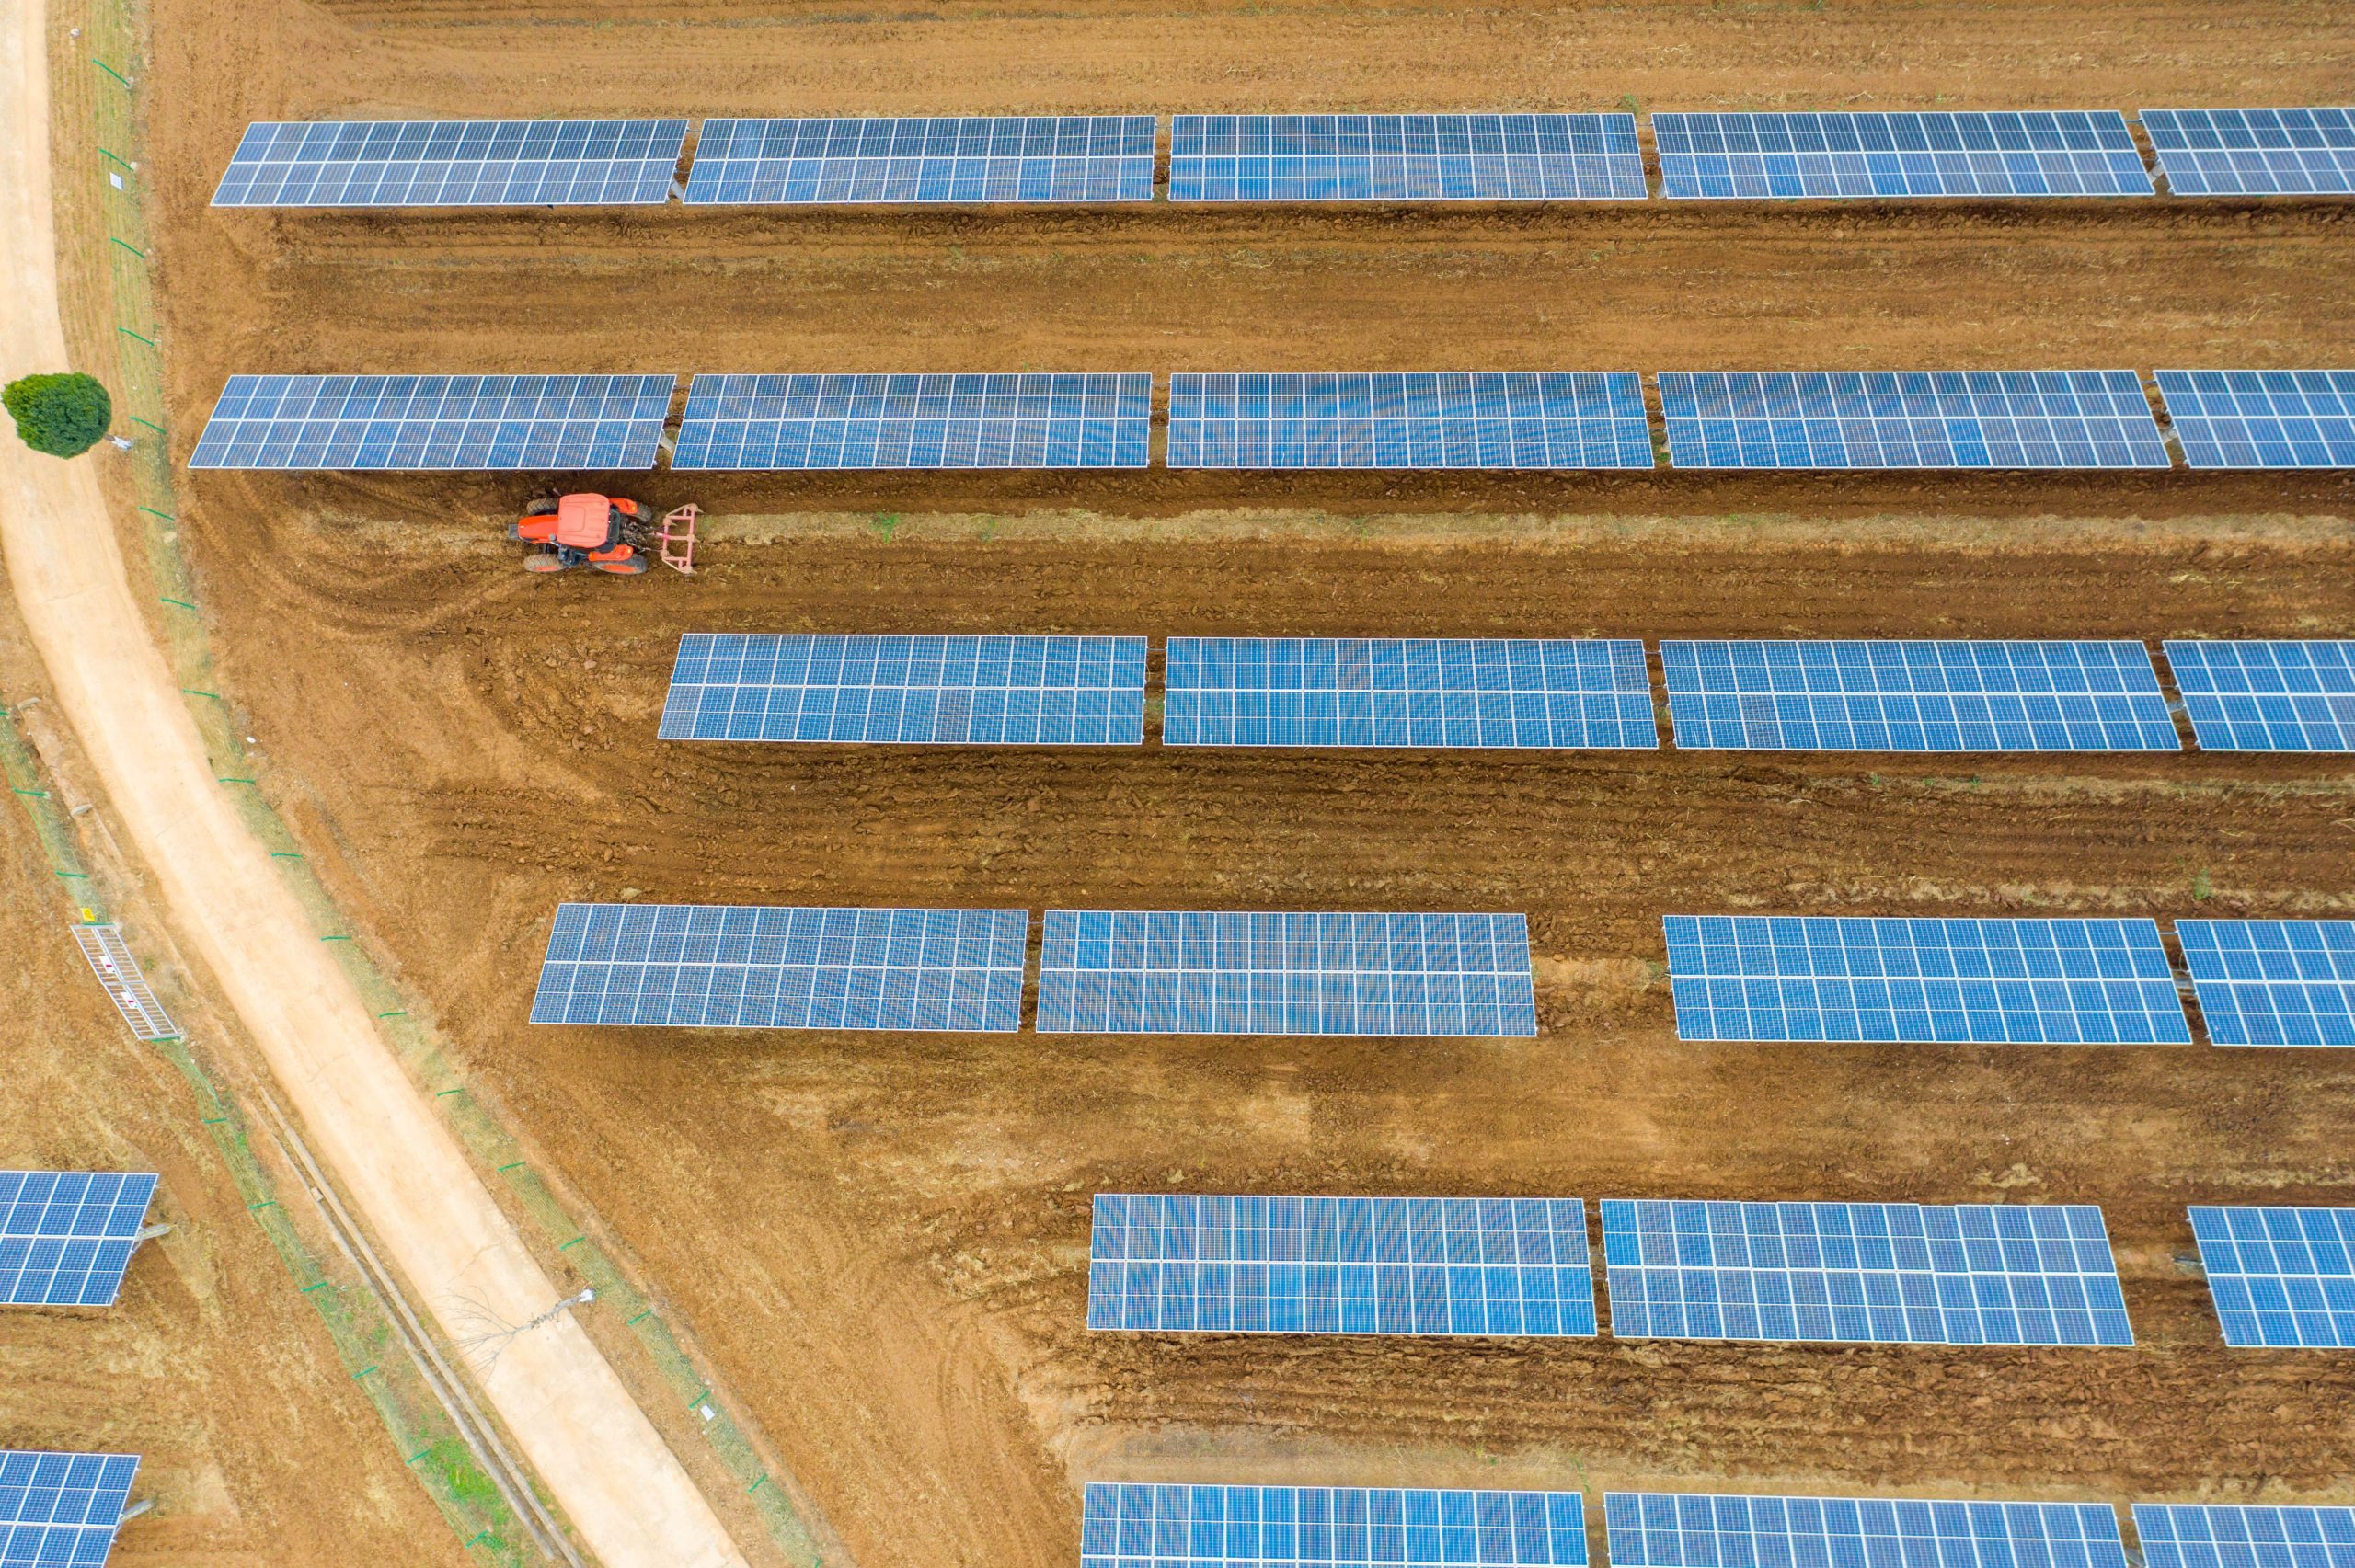 A “solar + agriculture” project in Yuncheng, Shanxi province. With China’s withdrawal from overseas coal investments, there is an opportunity to export other mixed “solar + ” projects to developing countries. (Image: Yan Xin/Alamy)